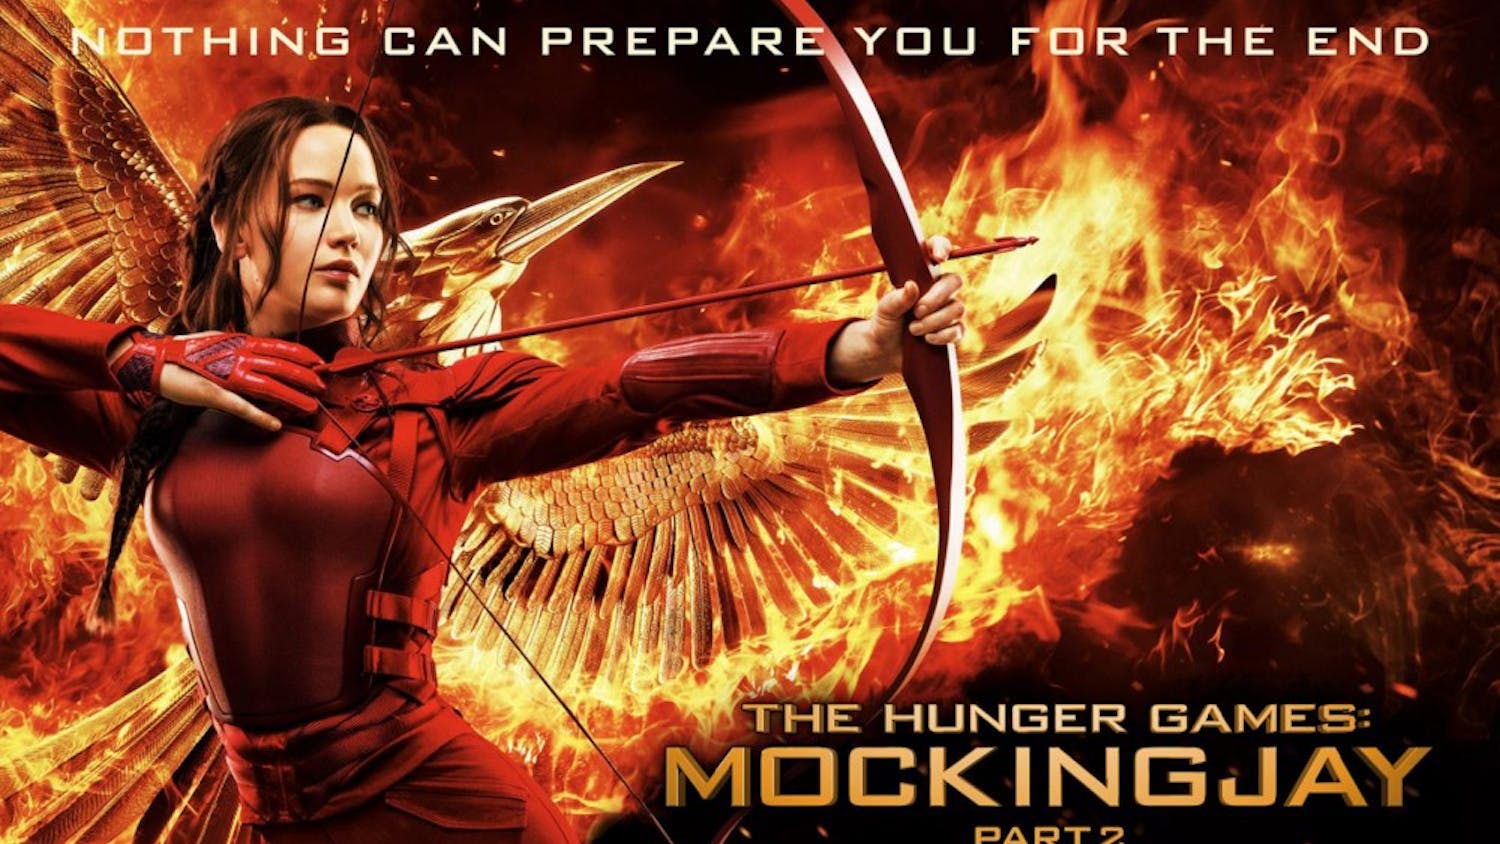 The second portion of the last "Hunger Games" movie was released November 19, and although action-packed, it has a mediocre plot-line.